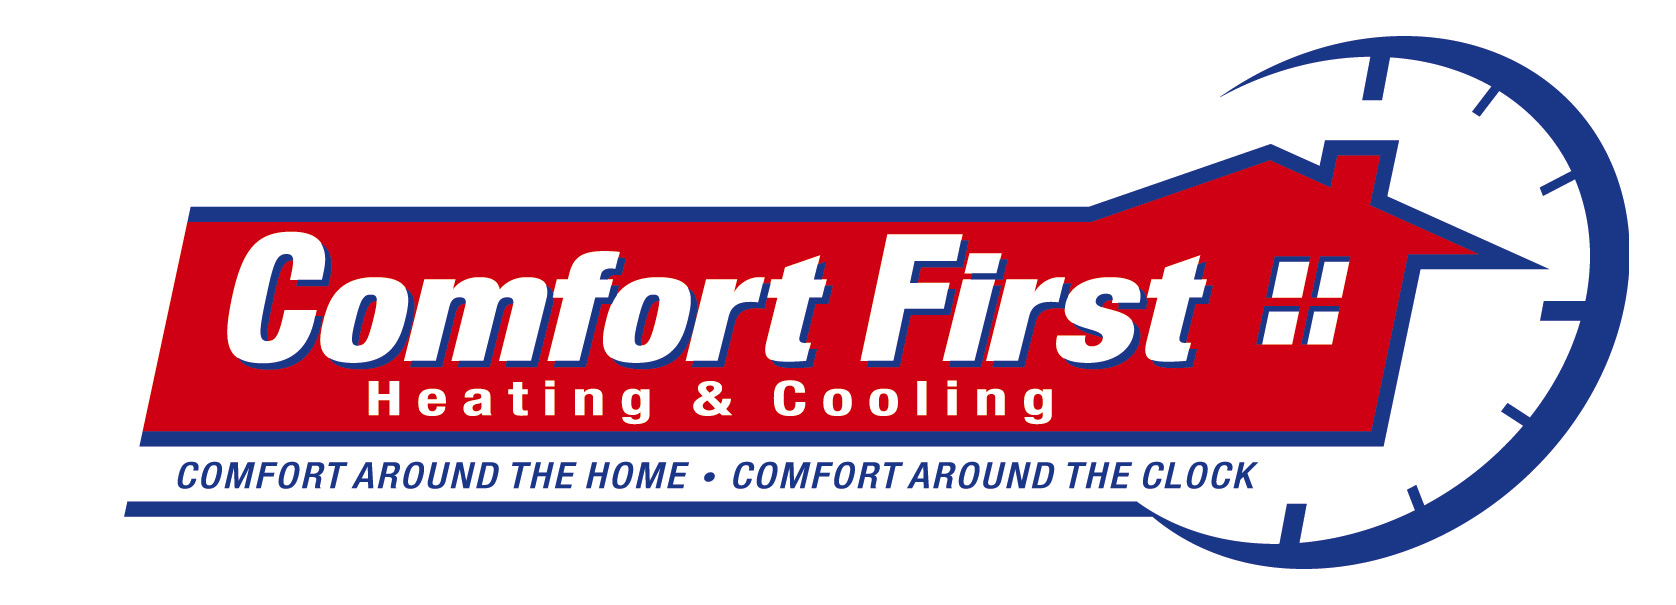 Home - Comfort First Heating and Cooling